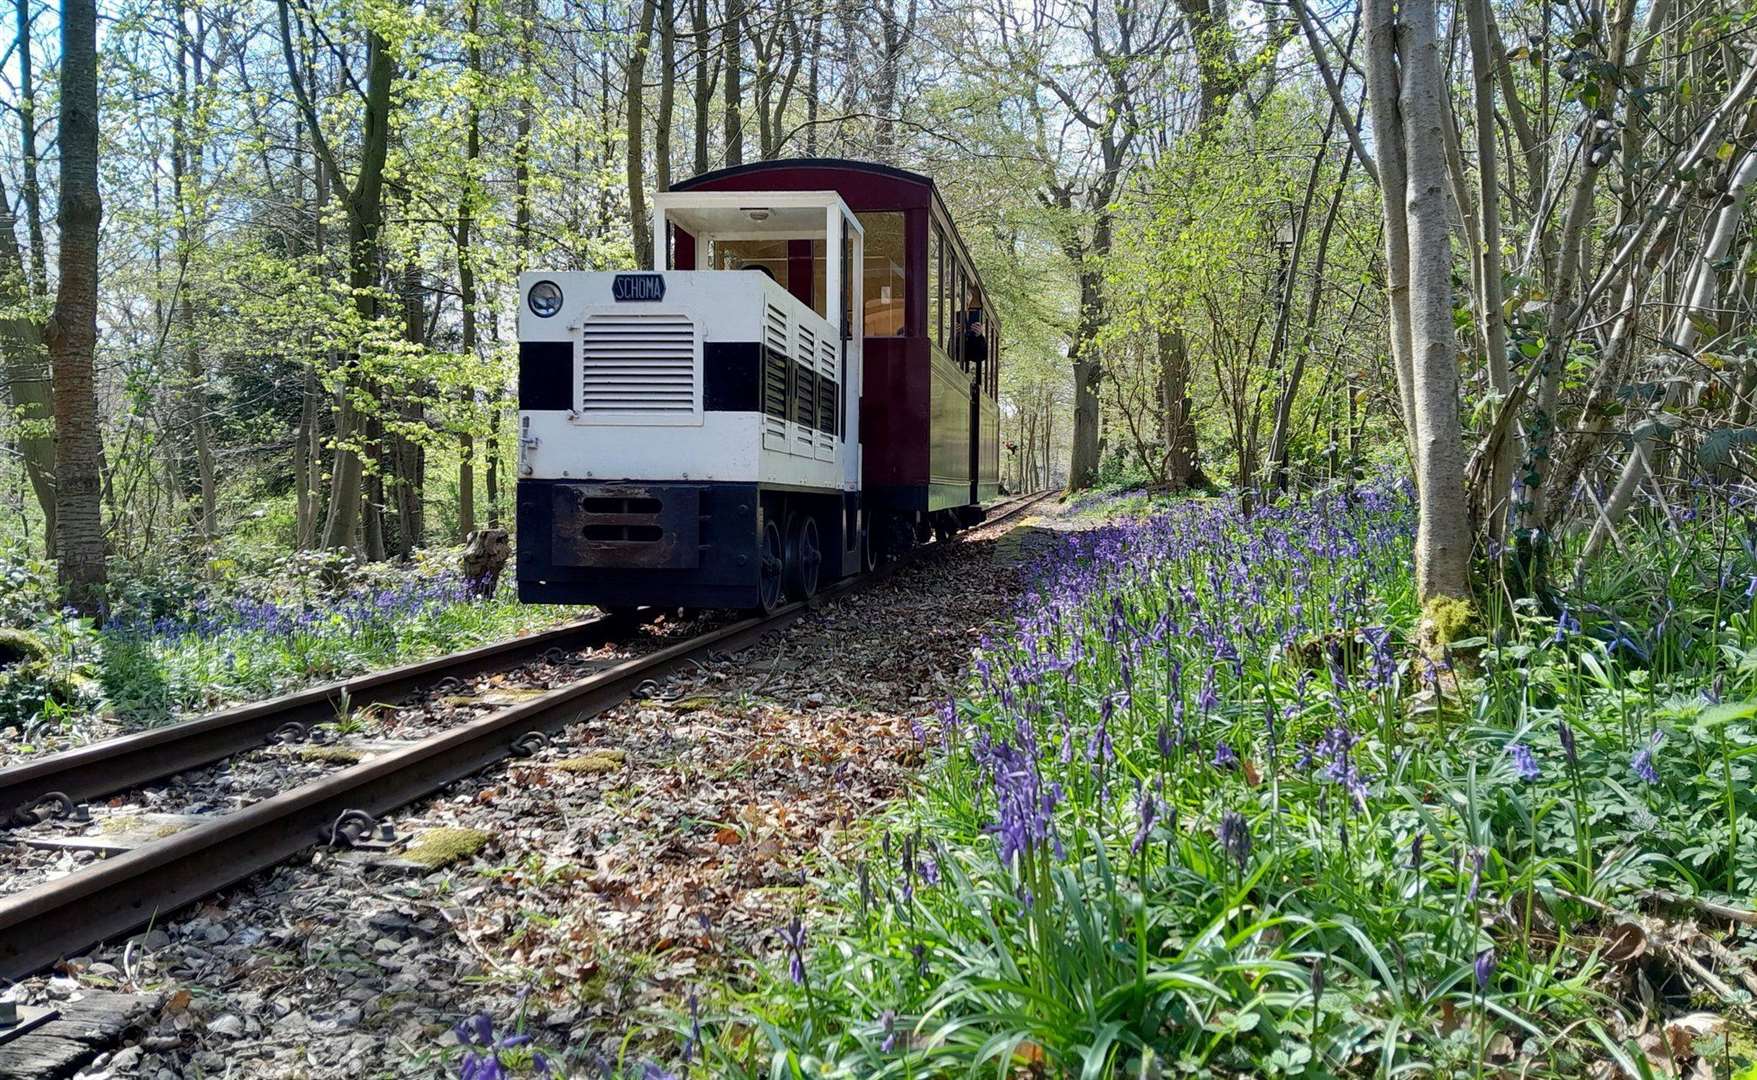 The Bredgar & Wormshill Light Railway’s spring events promise an unforgettable experience